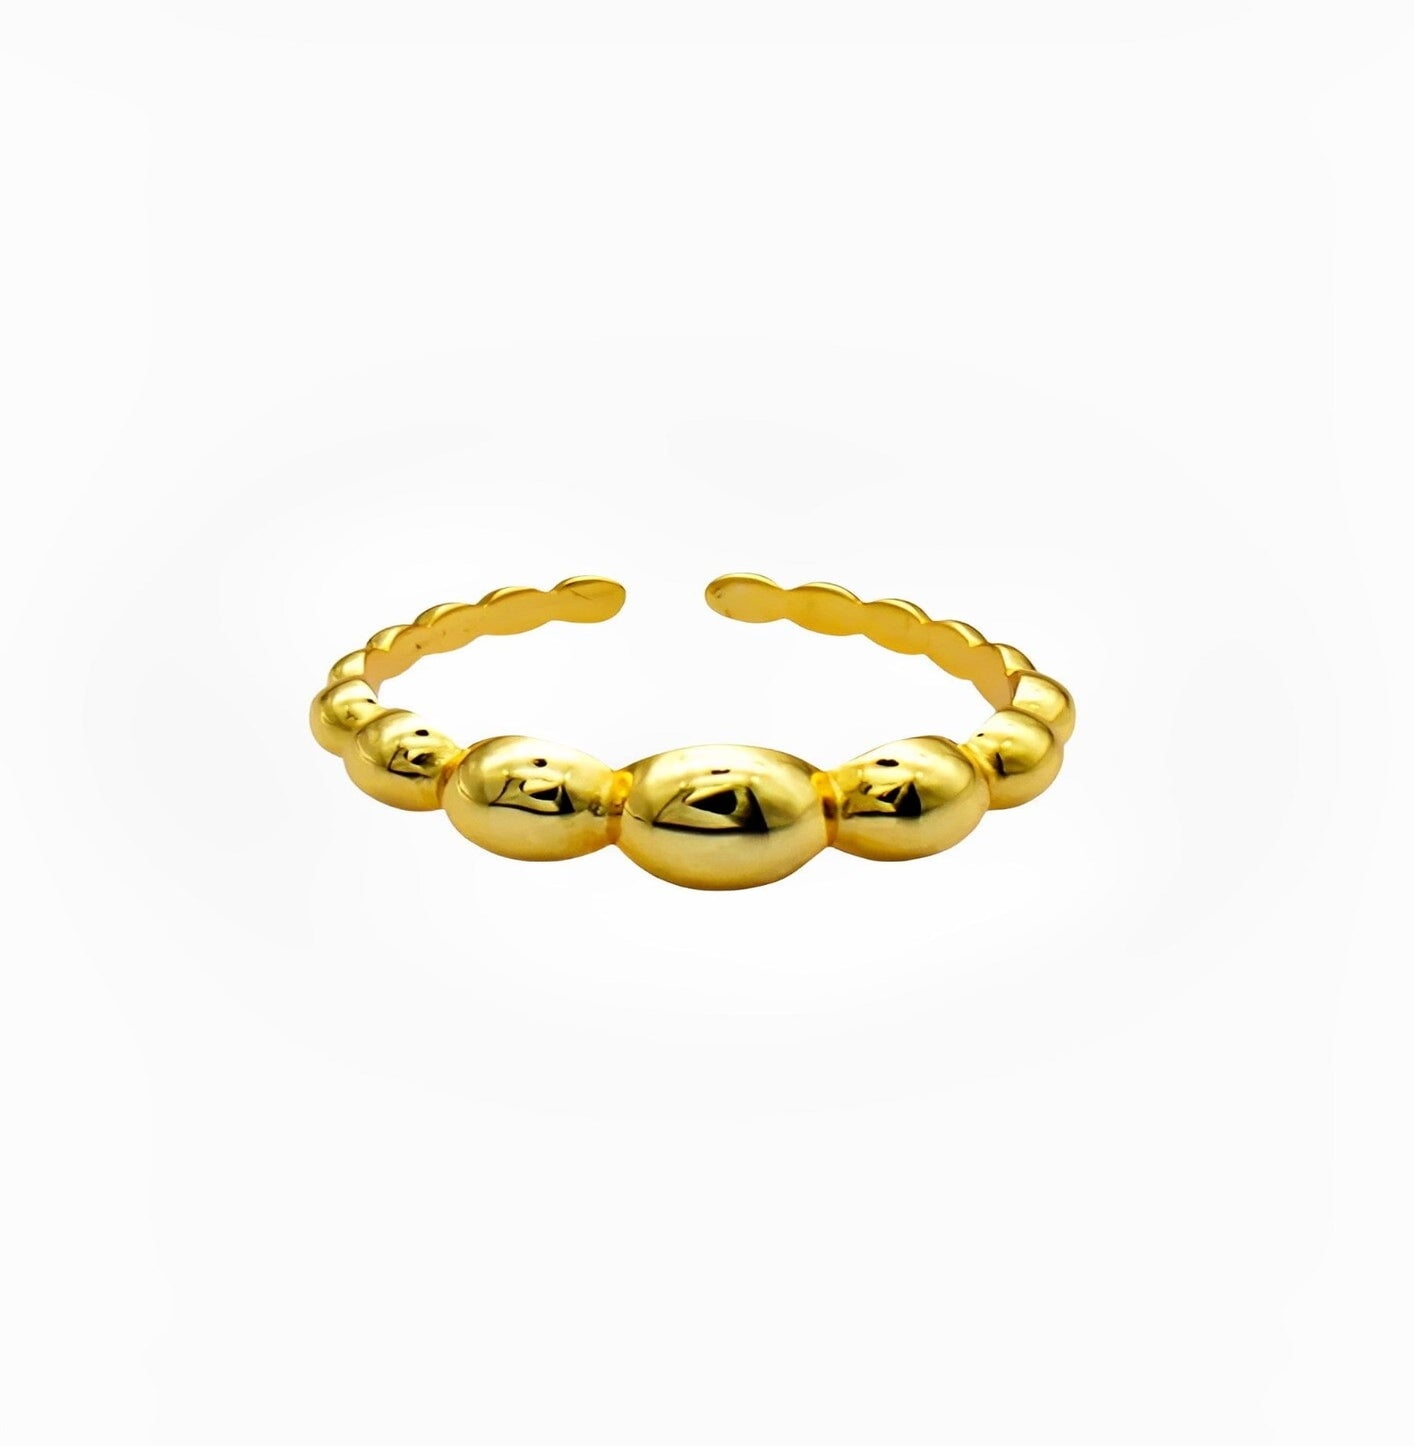 MARRIANE RING earing Yubama Jewelry Online Store - The Elegant Designs of Gold and Silver ! 